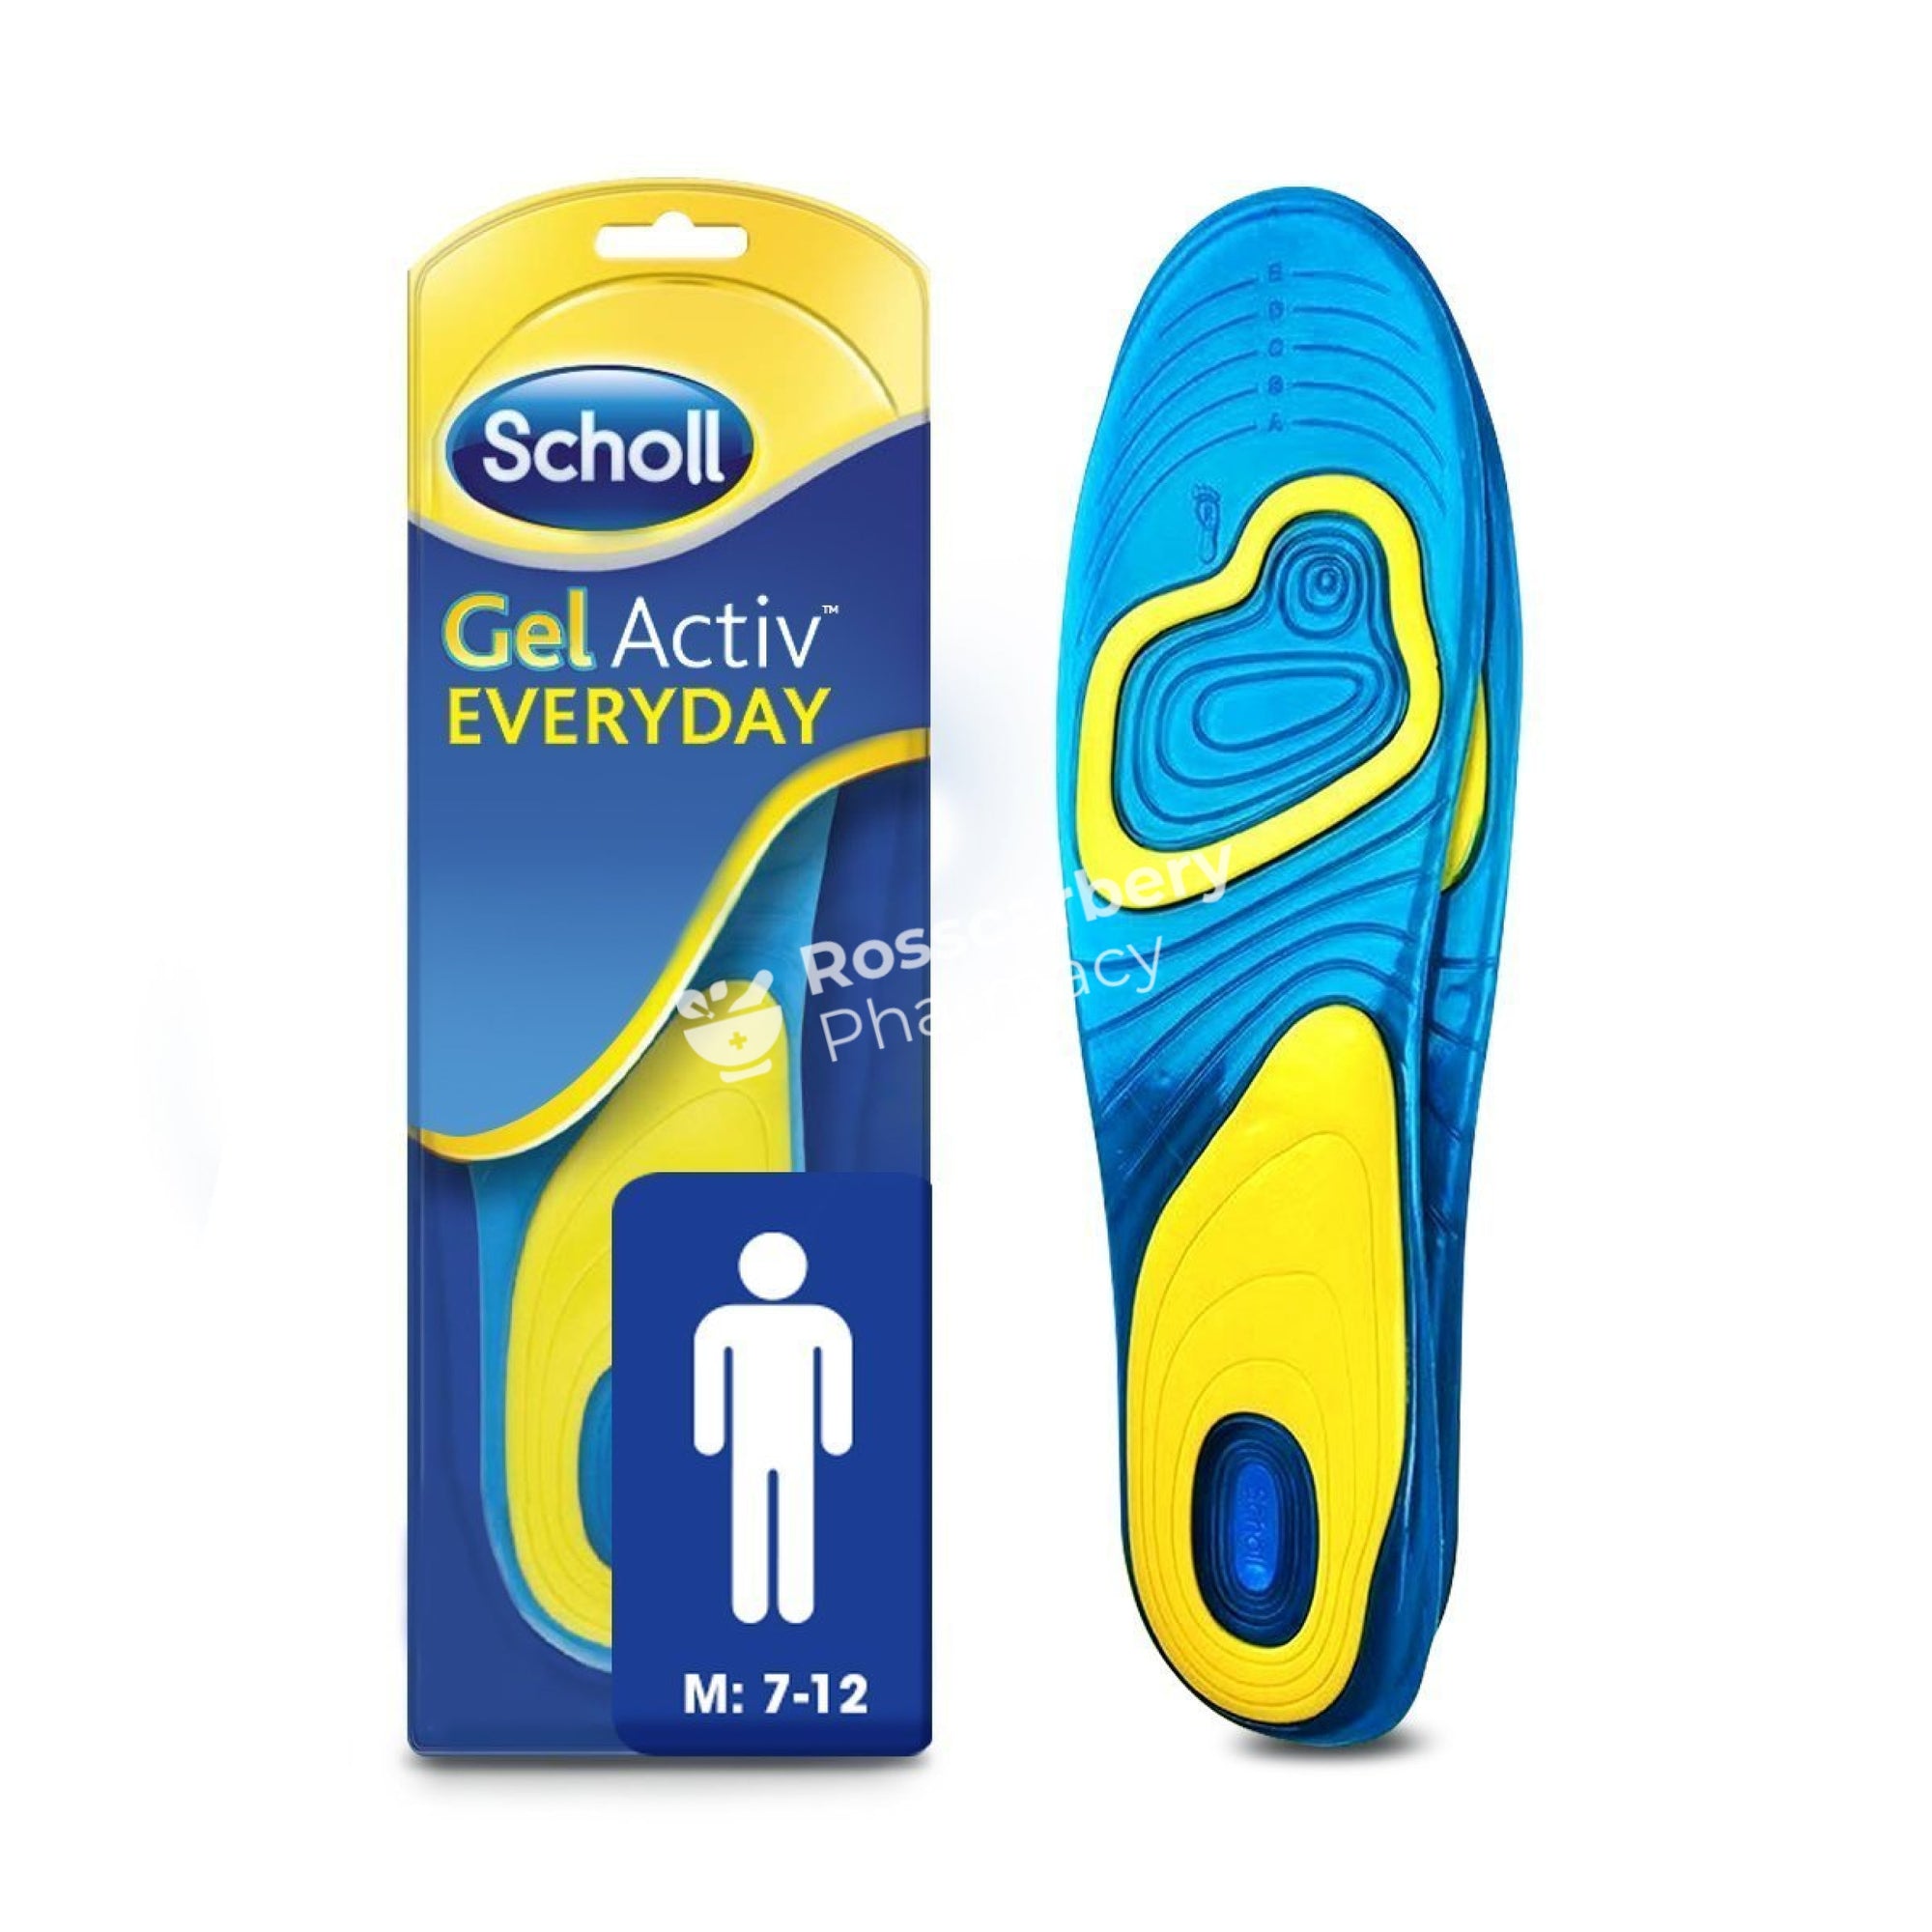 Scholl Gel Activ Everyday Male 7-12 (Uk) Insoles & Supports